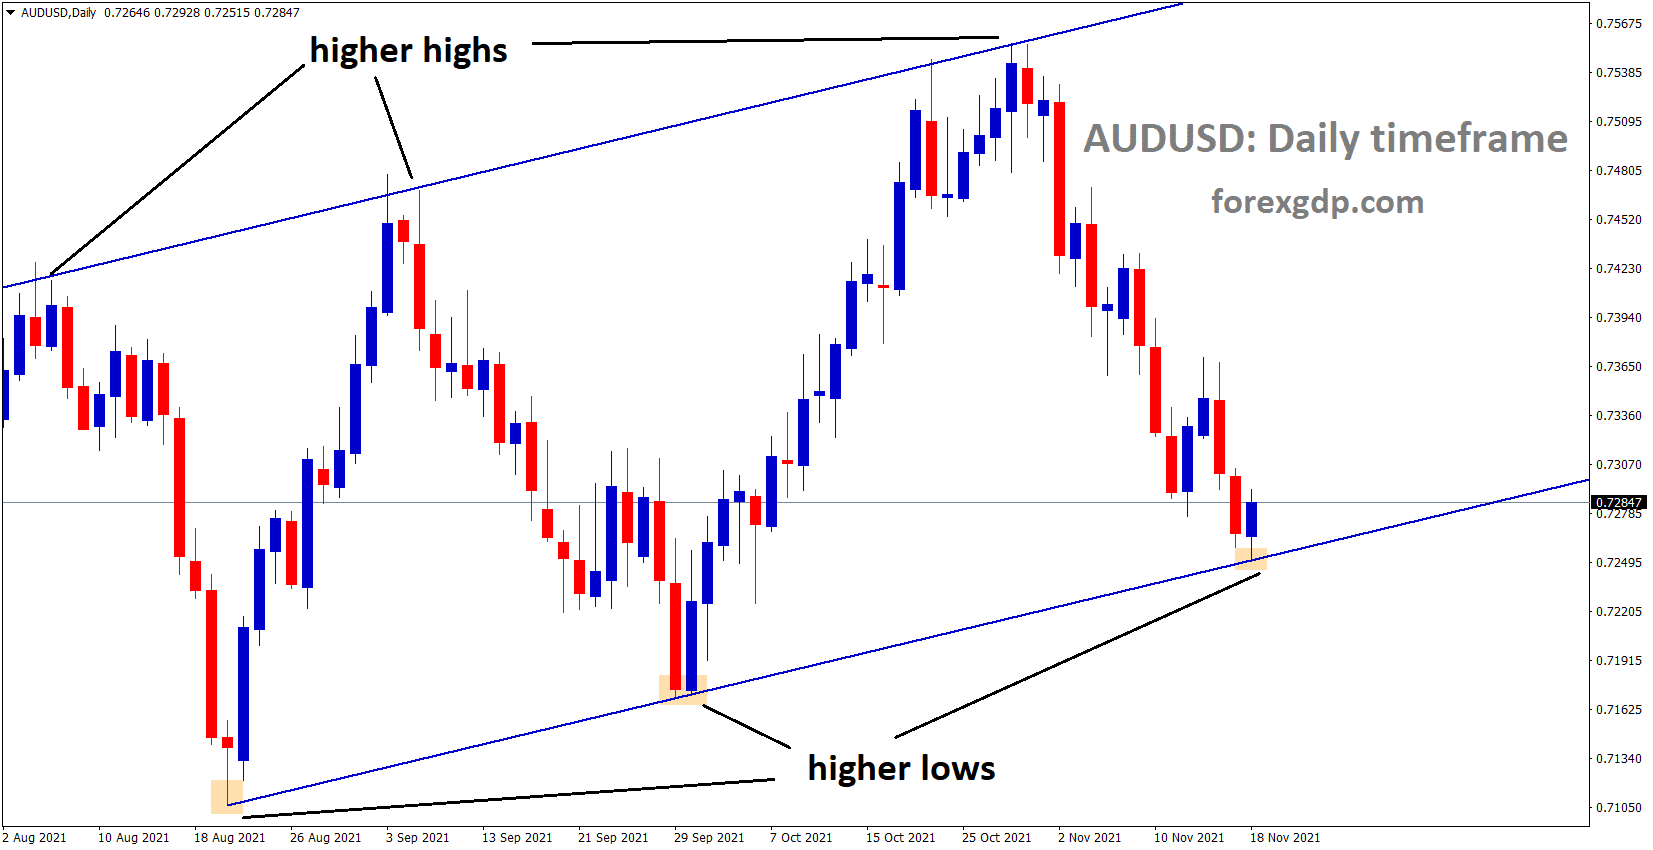 AUDUSD is moving in an ascending channel and the market has reached the higher low area of the channel